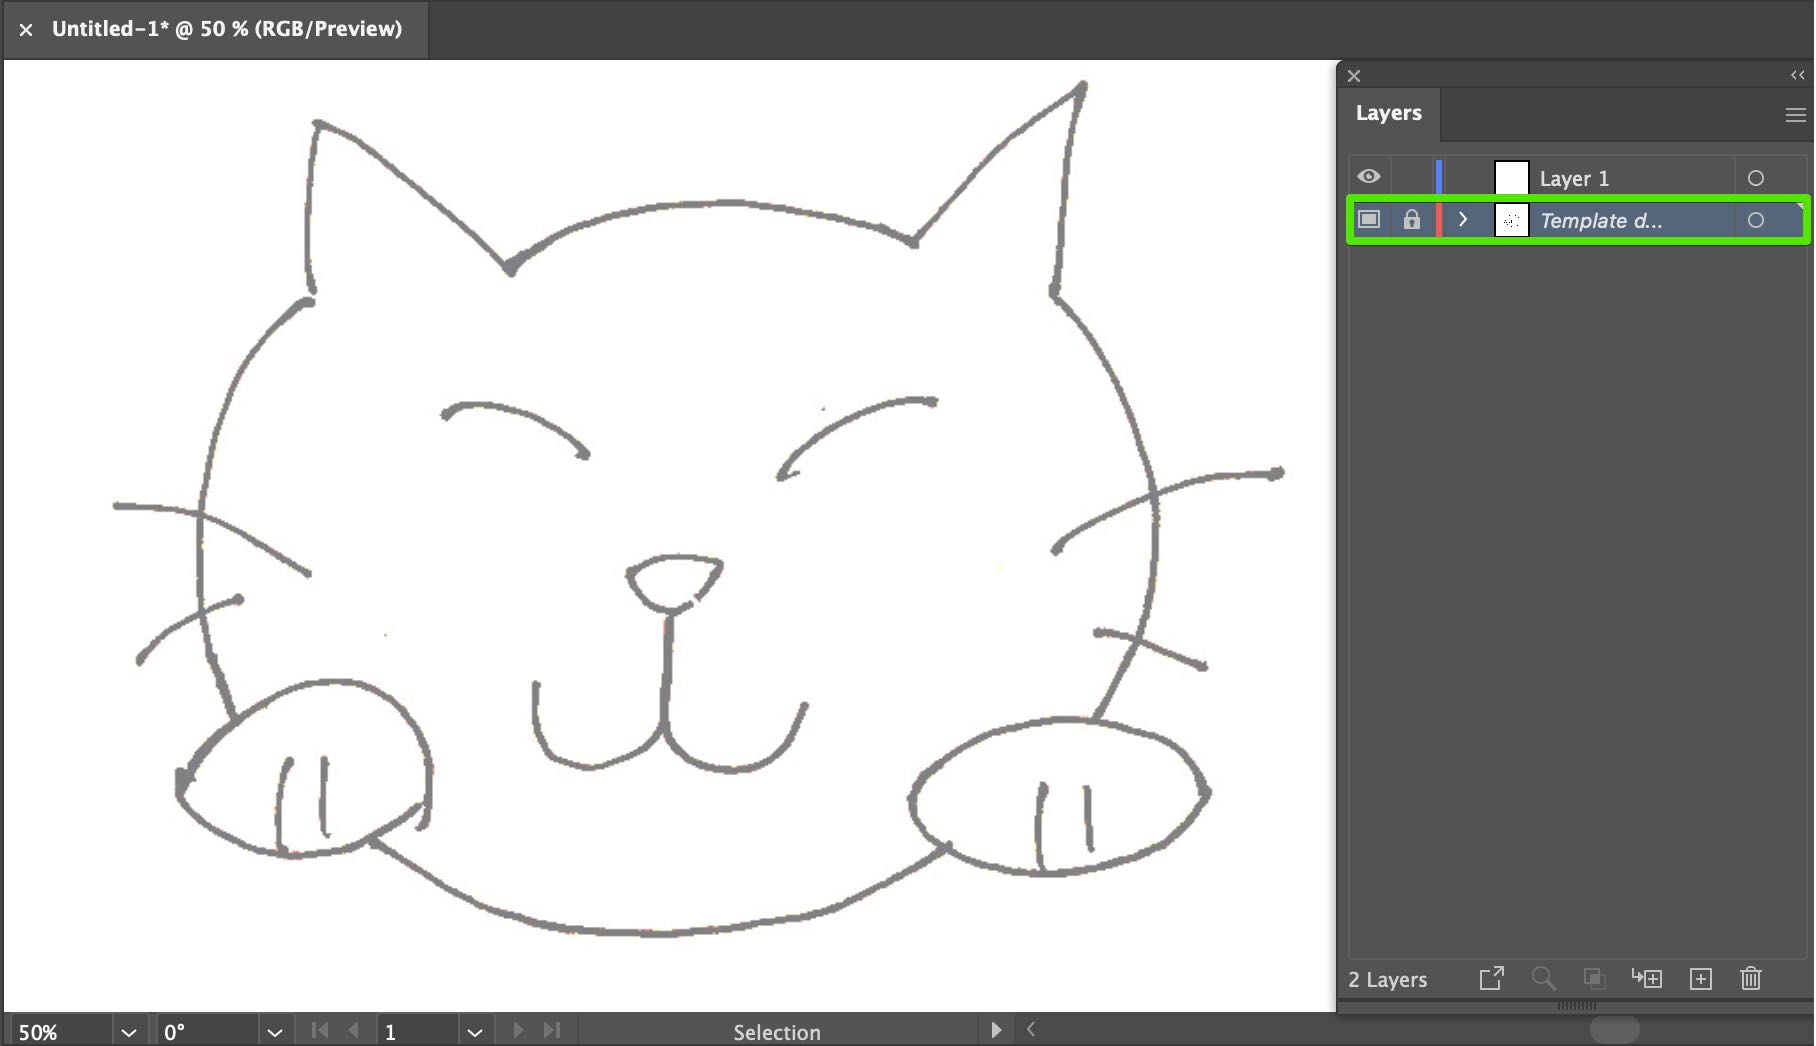 What Illustrator Tools do you Need for Drawing Lessons?